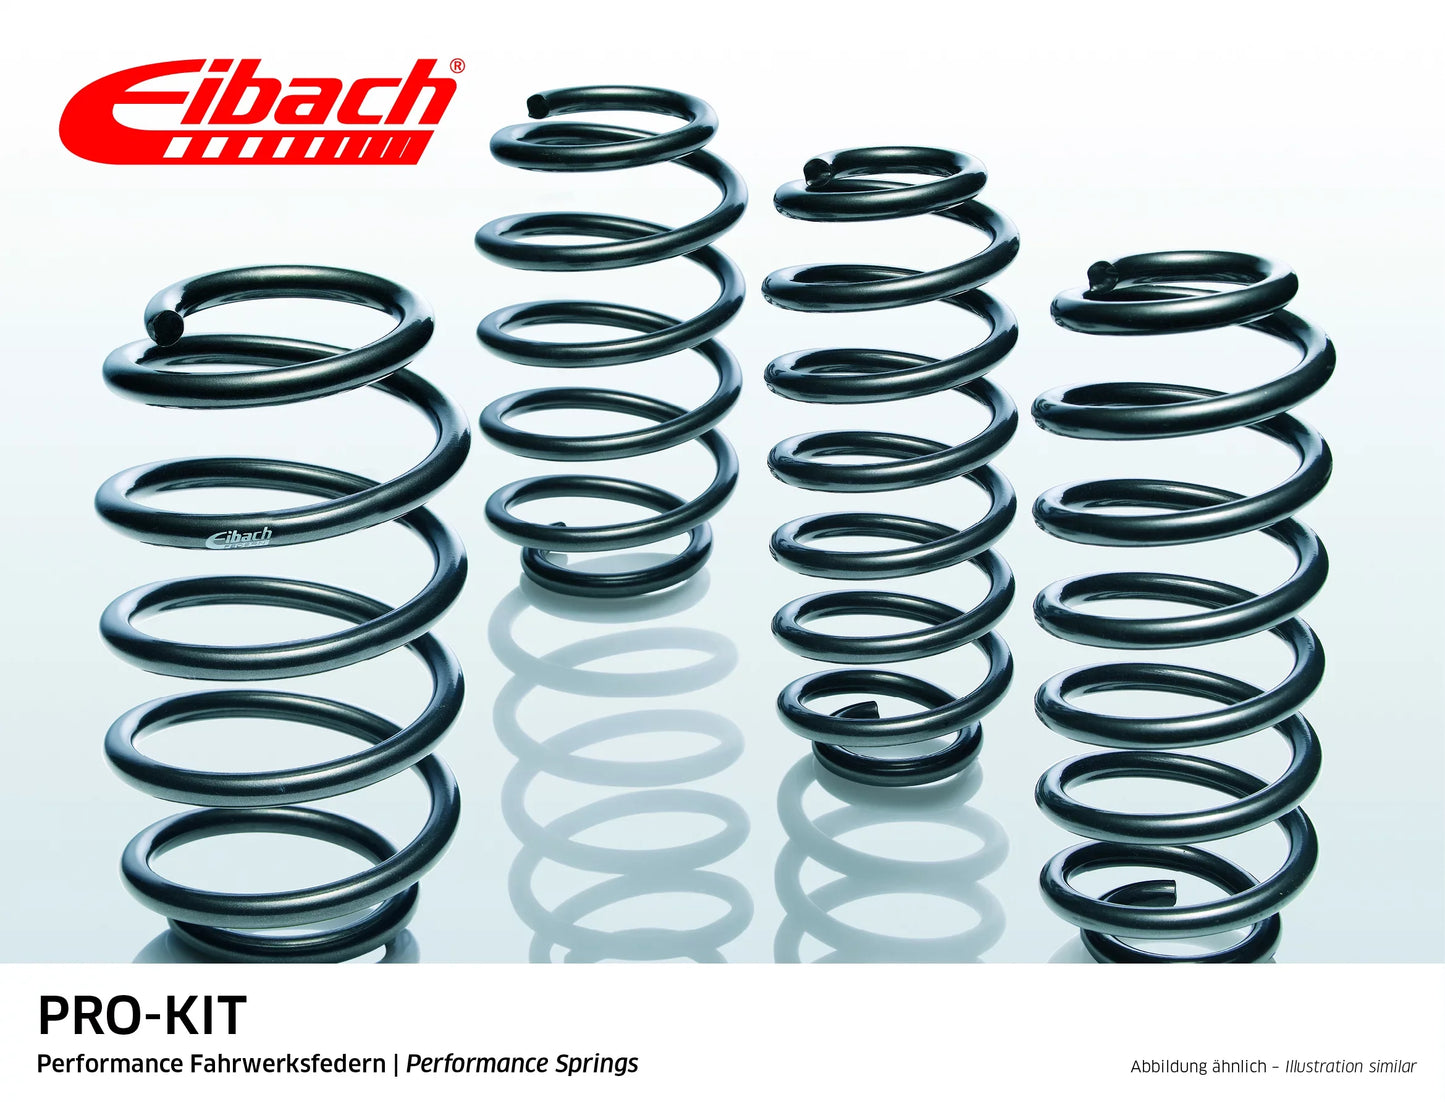 Eibach Pro-Kit Lowering Springs (E10-25-040-04-22) at £325.53